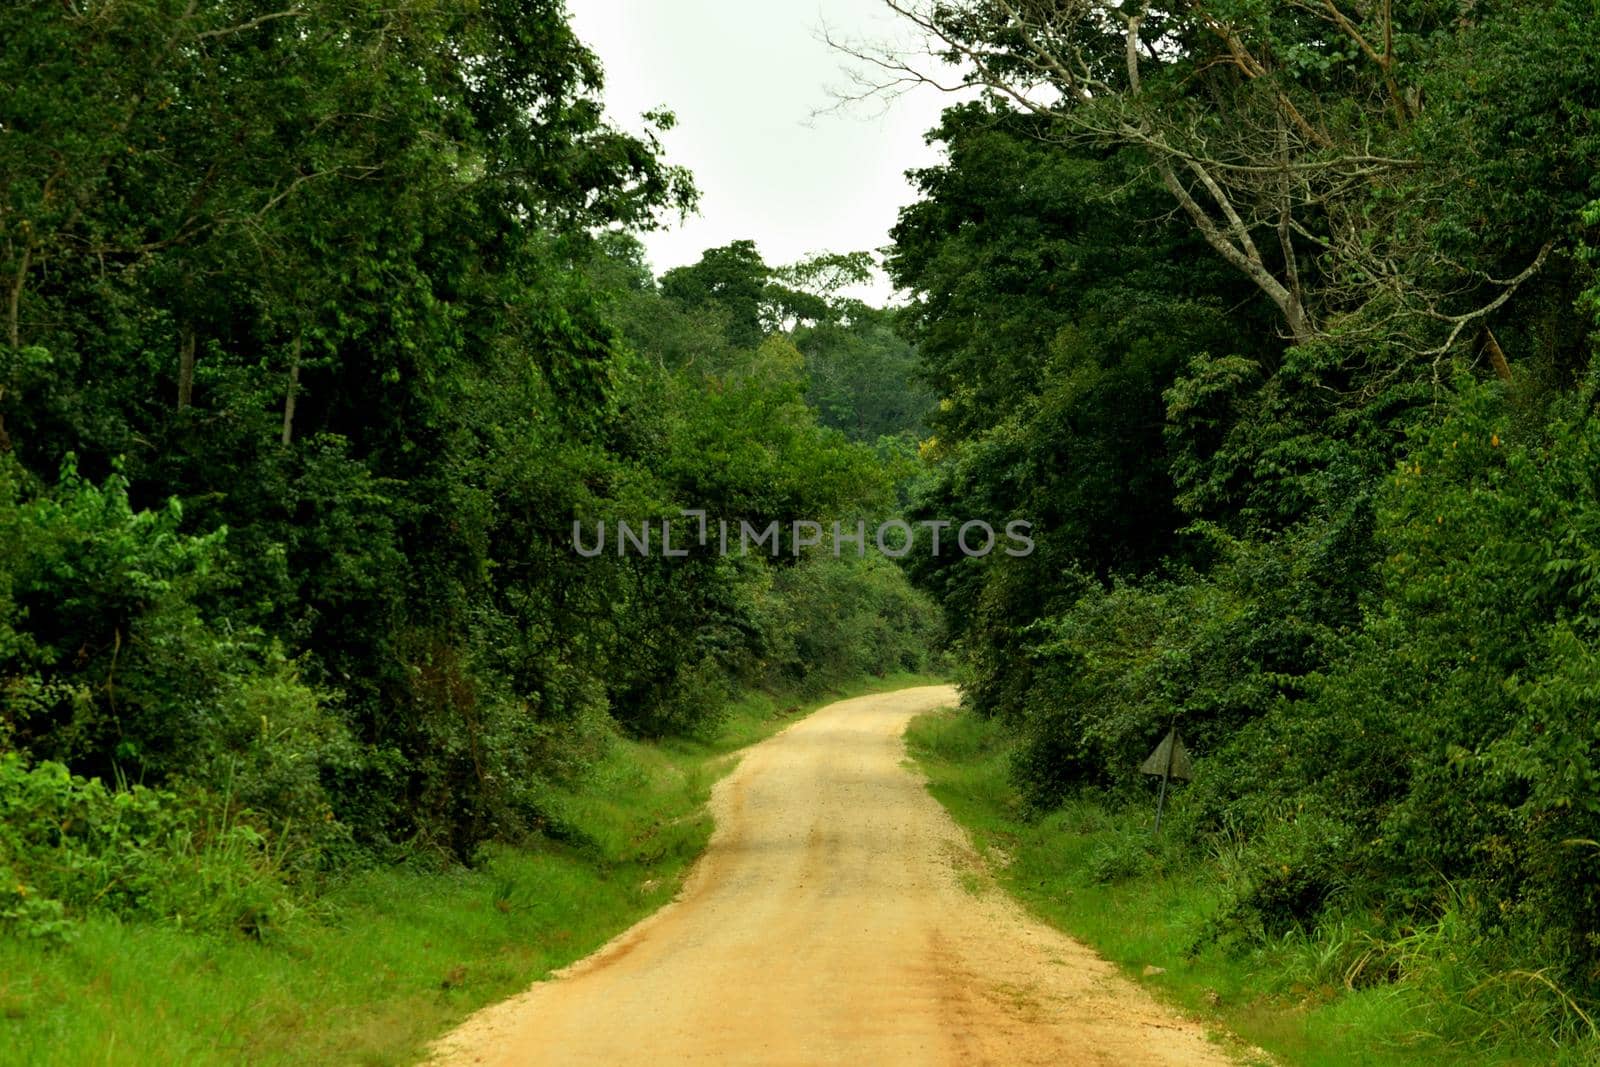 View of Budongo forest and the main street, Uganda